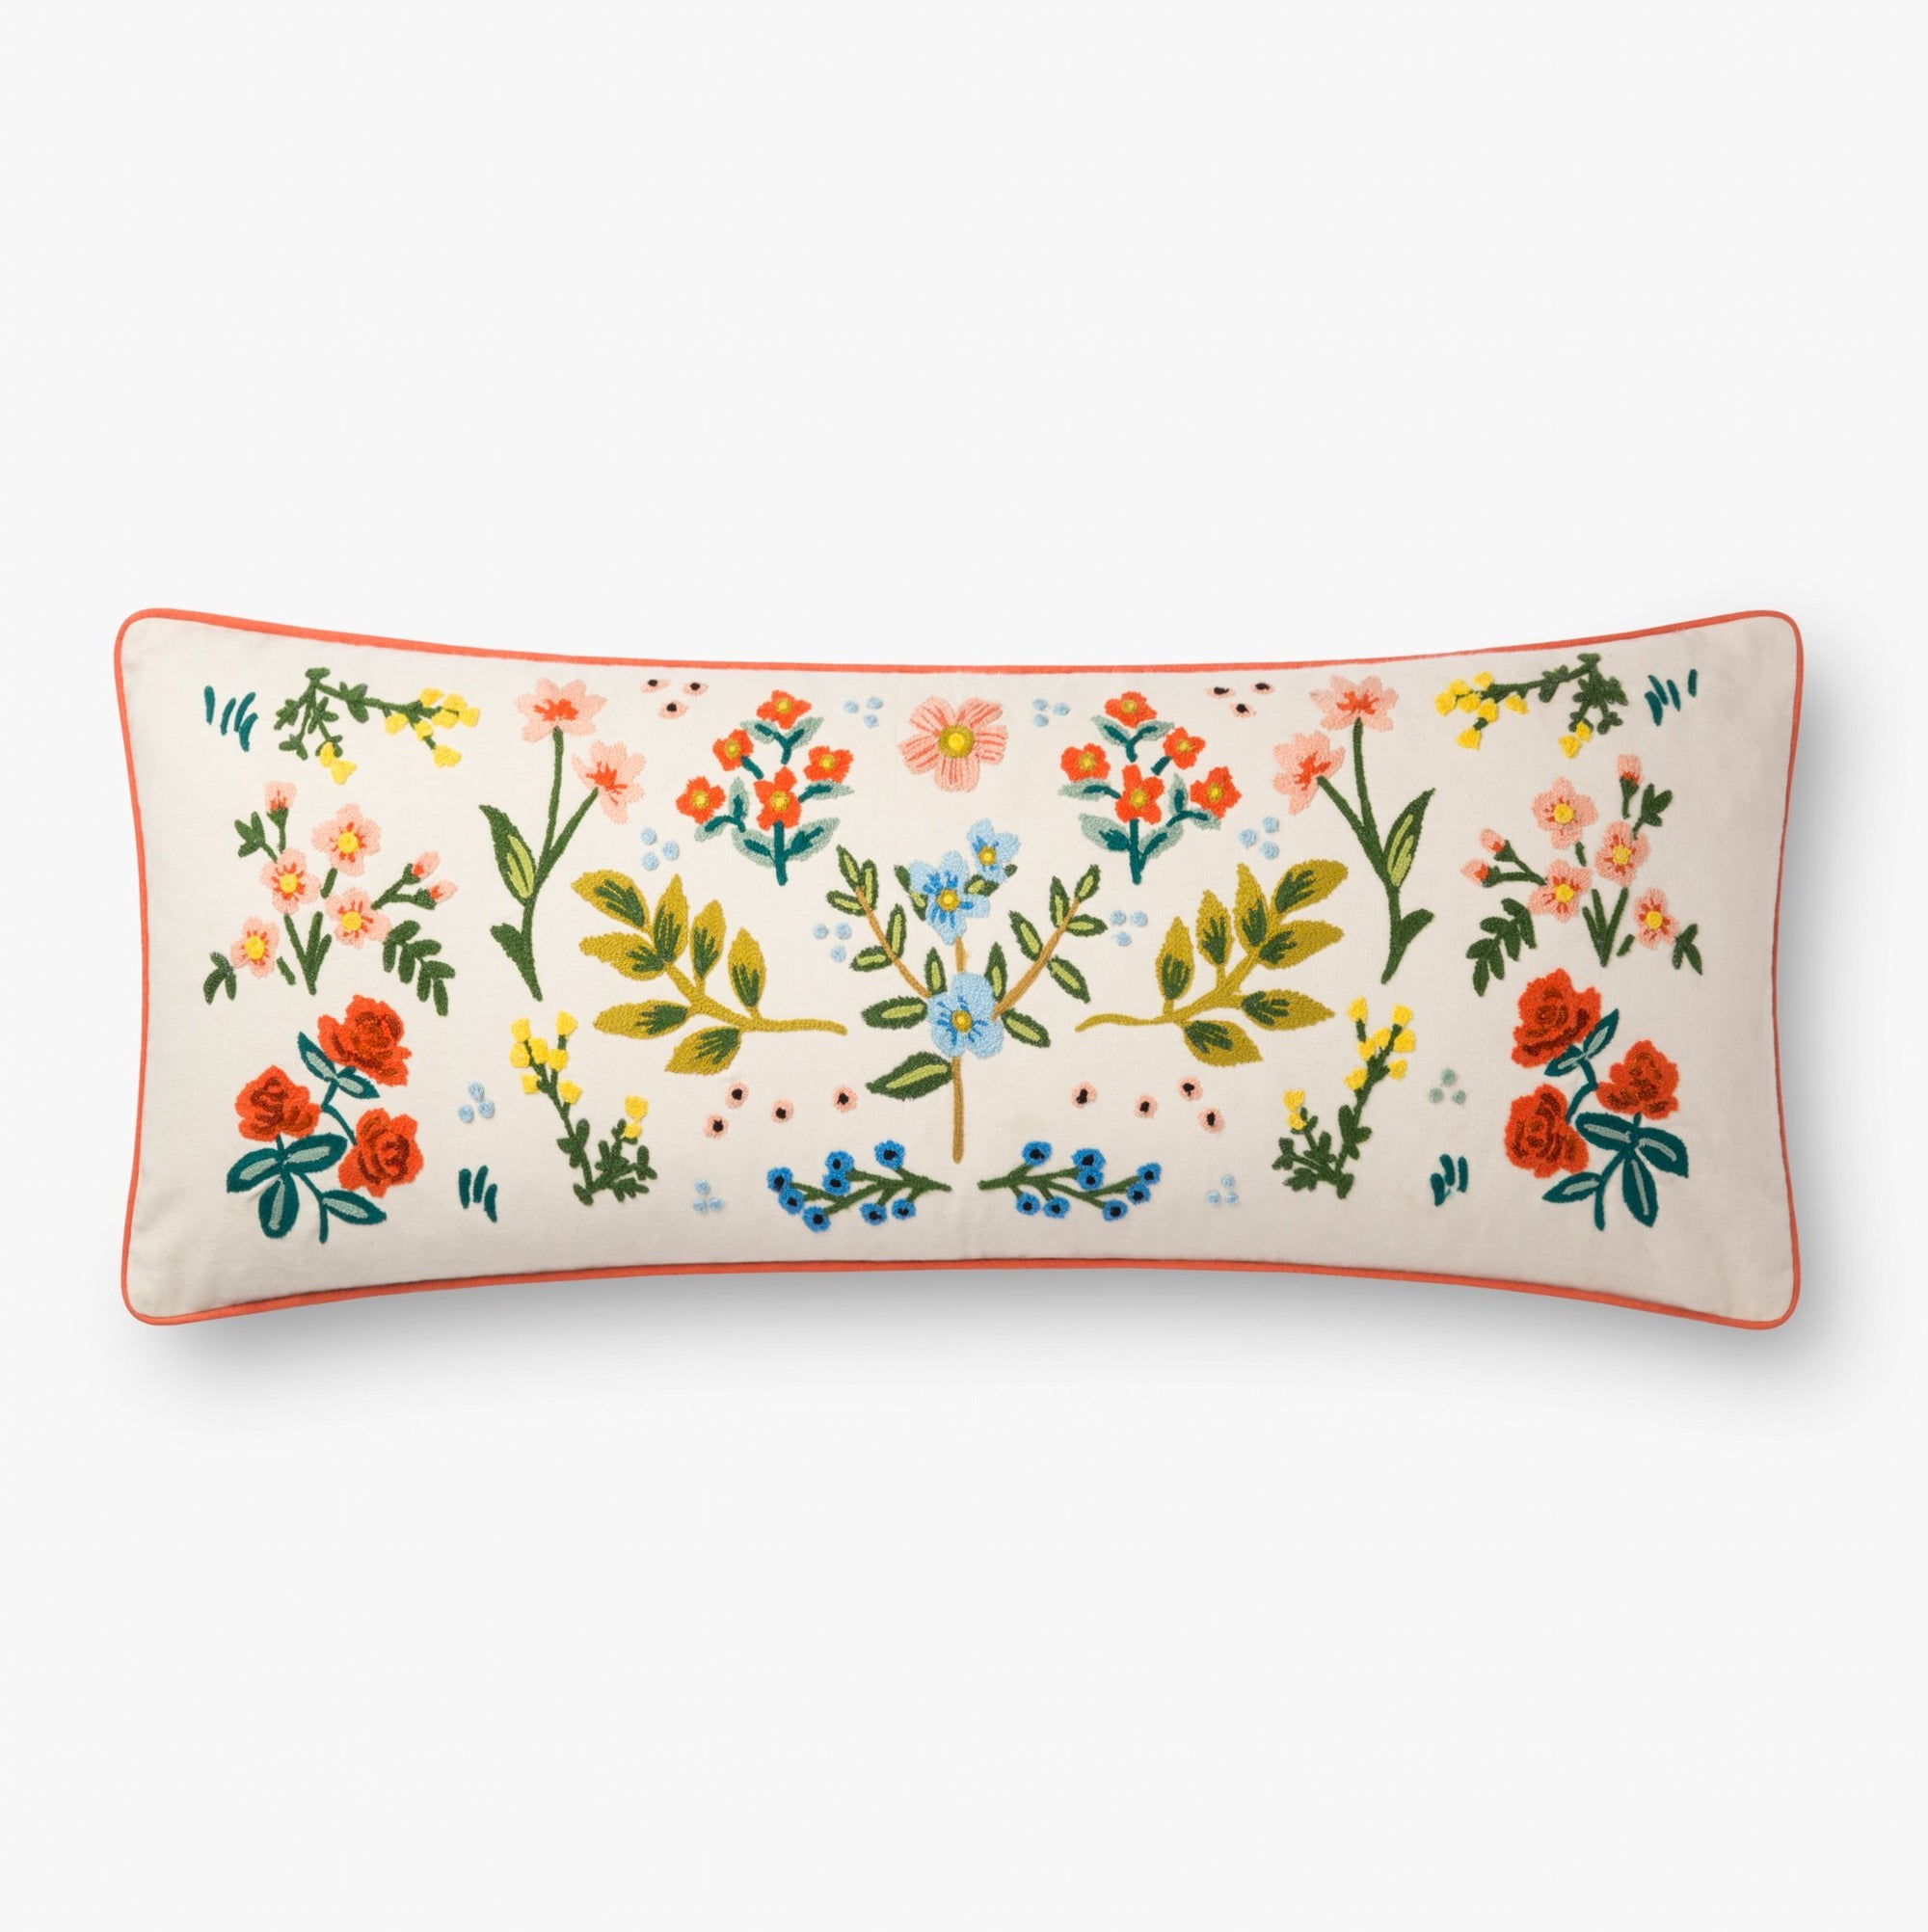 Rifle Paper Co P6028 Ivory/Multi Pillow - Rug & Home